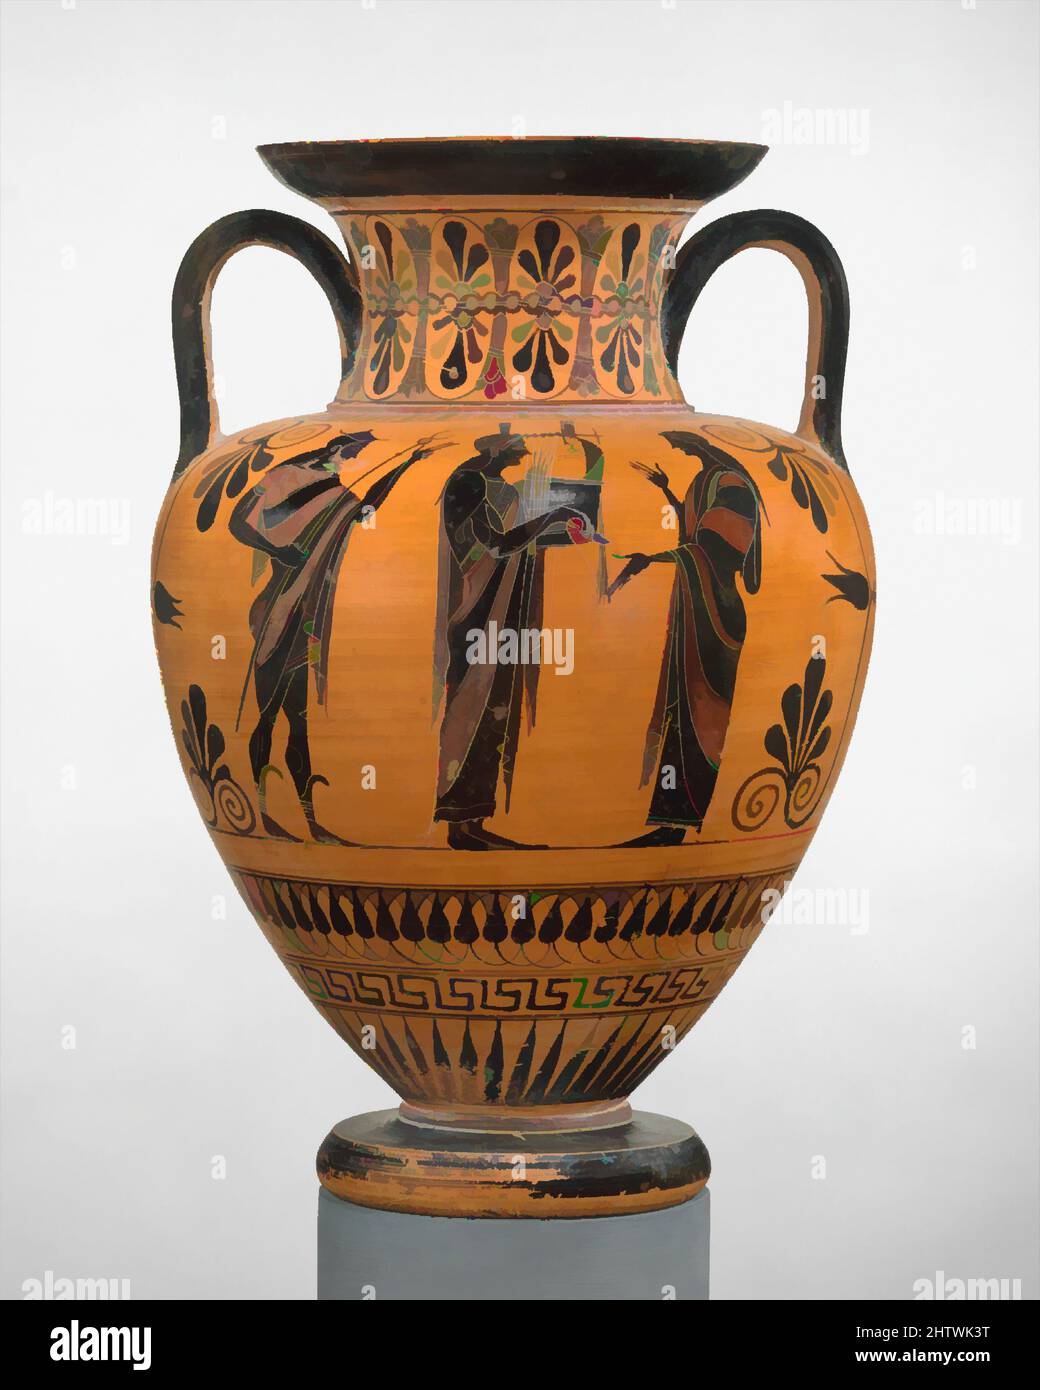 Art inspired by Terracotta neck-amphora (jar), Archaic, ca. 530 B.C., Greek, Attic, Terracotta; black-figure, H. 15 7/8 in. (40.3 cm), Vases, Obverse, Apollo between Hermes and goddess Reverse, Memnon between his Ethiopian squires In the Trojan War, Memnon, the son of Tithonos and Eos, Classic works modernized by Artotop with a splash of modernity. Shapes, color and value, eye-catching visual impact on art. Emotions through freedom of artworks in a contemporary way. A timeless message pursuing a wildly creative new direction. Artists turning to the digital medium and creating the Artotop NFT Stock Photo